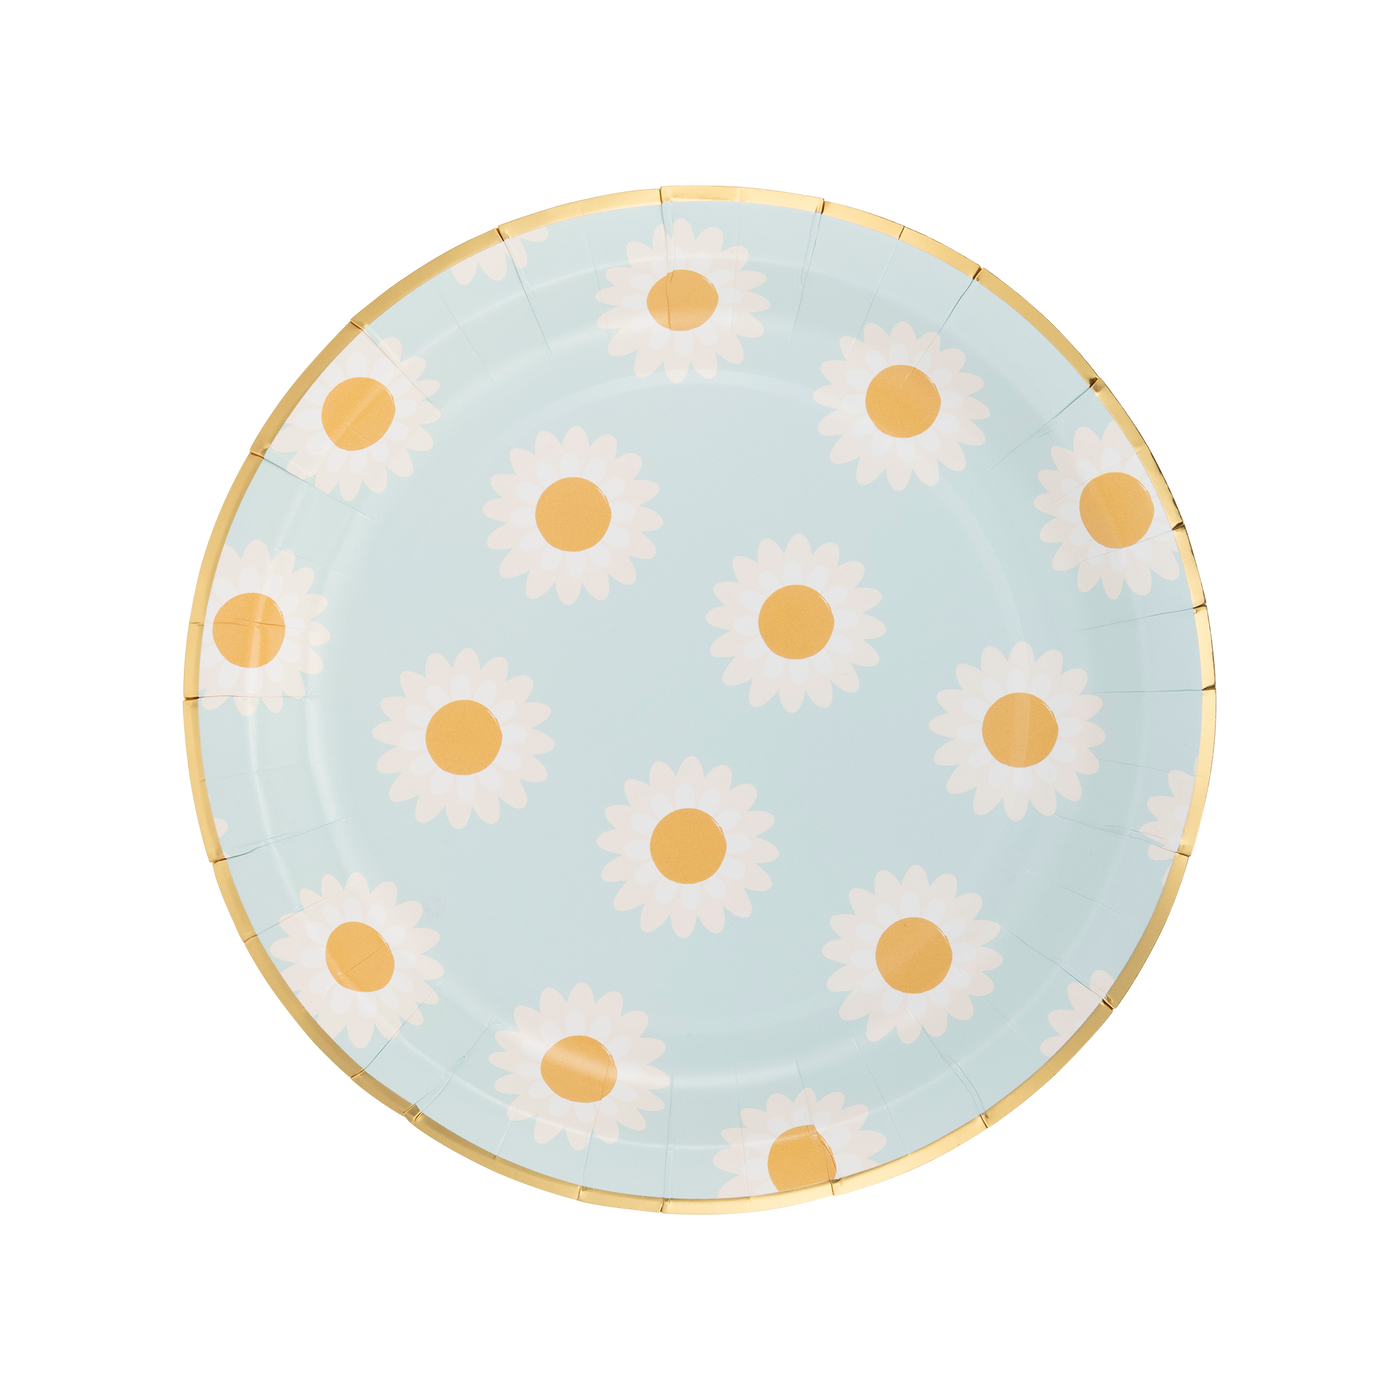 Daisies Paper Plate